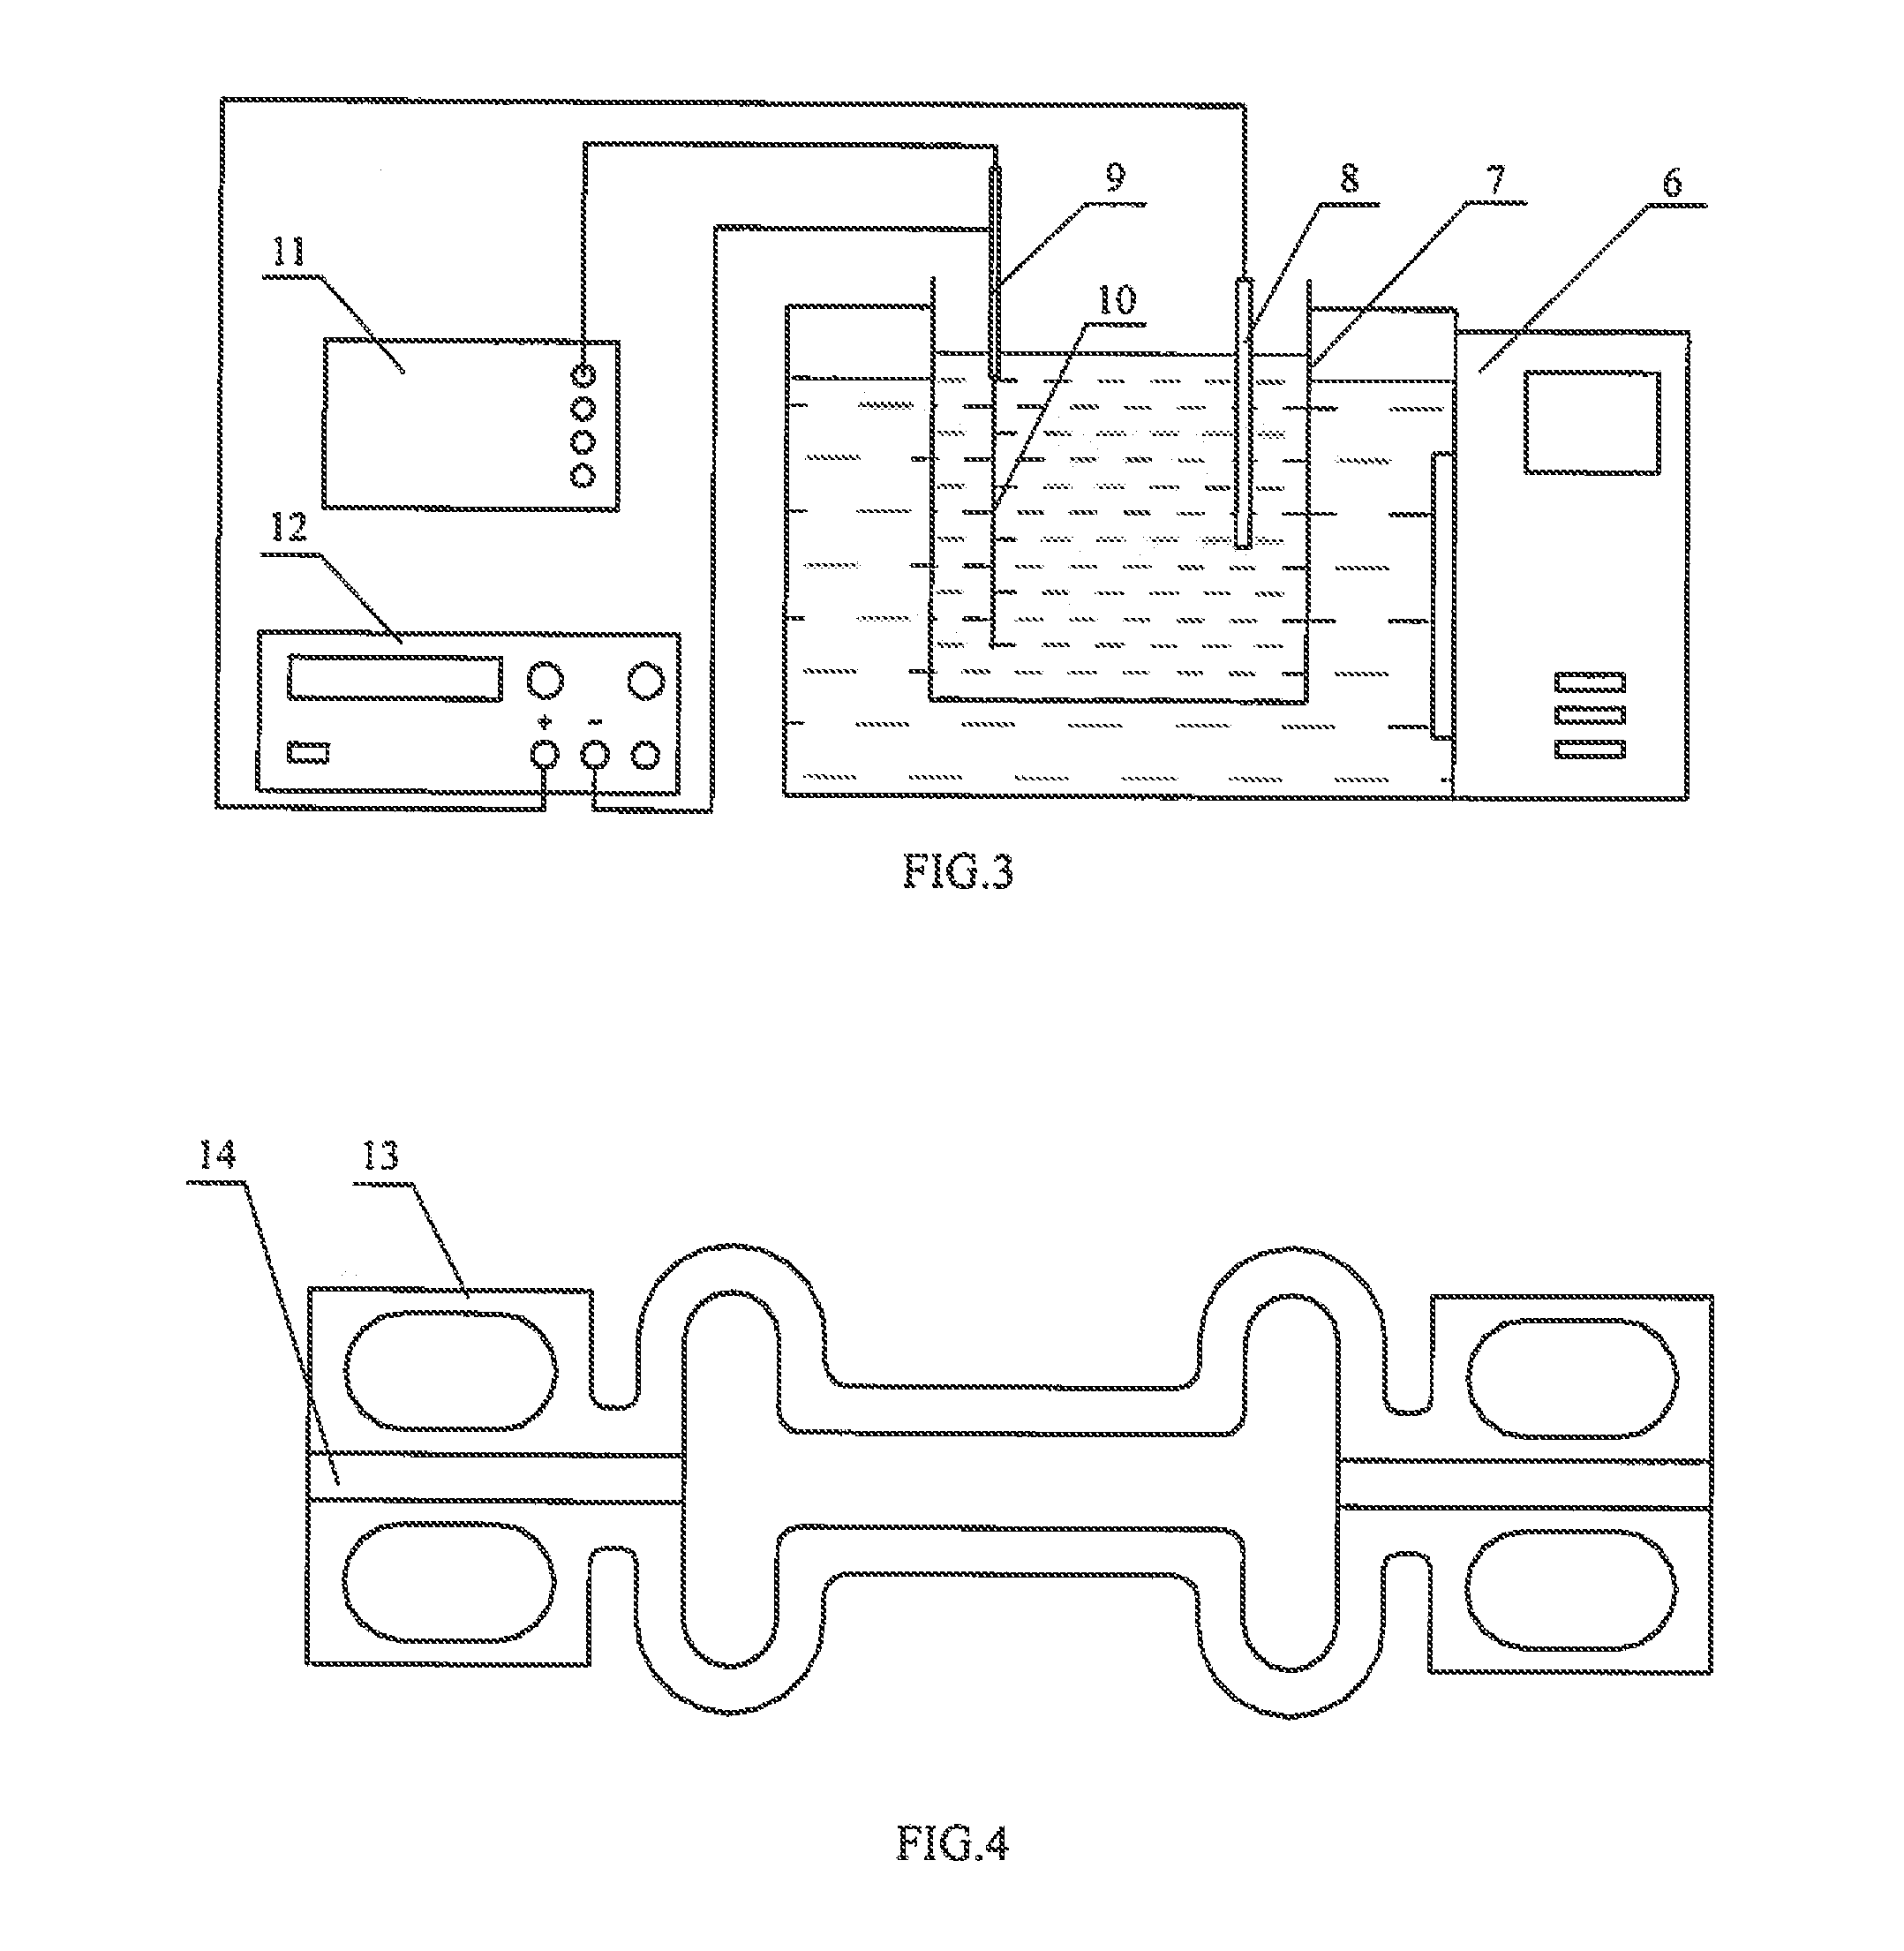 High-temperature-resistant metal-packaged fiber bragg grating sensor and manufacturing method therefor